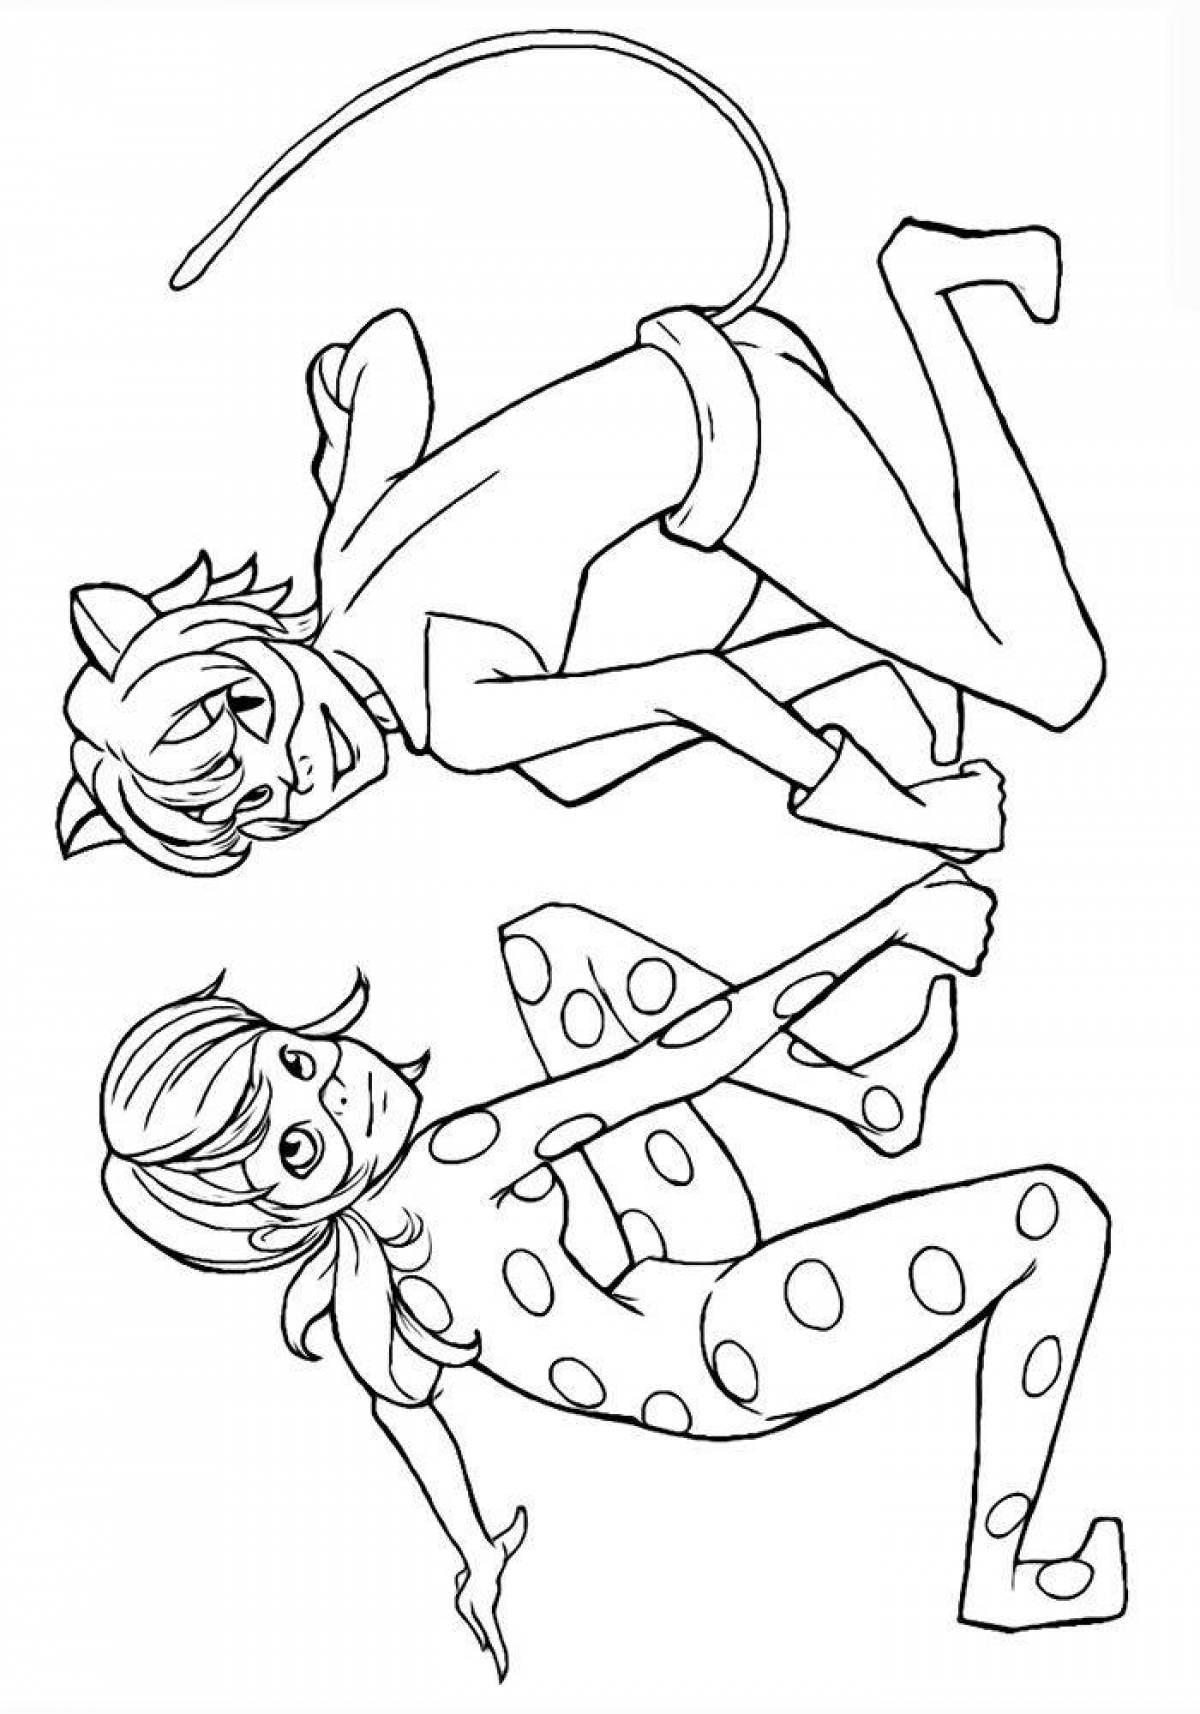 Fabulous ladybug and super cat coloring pages for kids